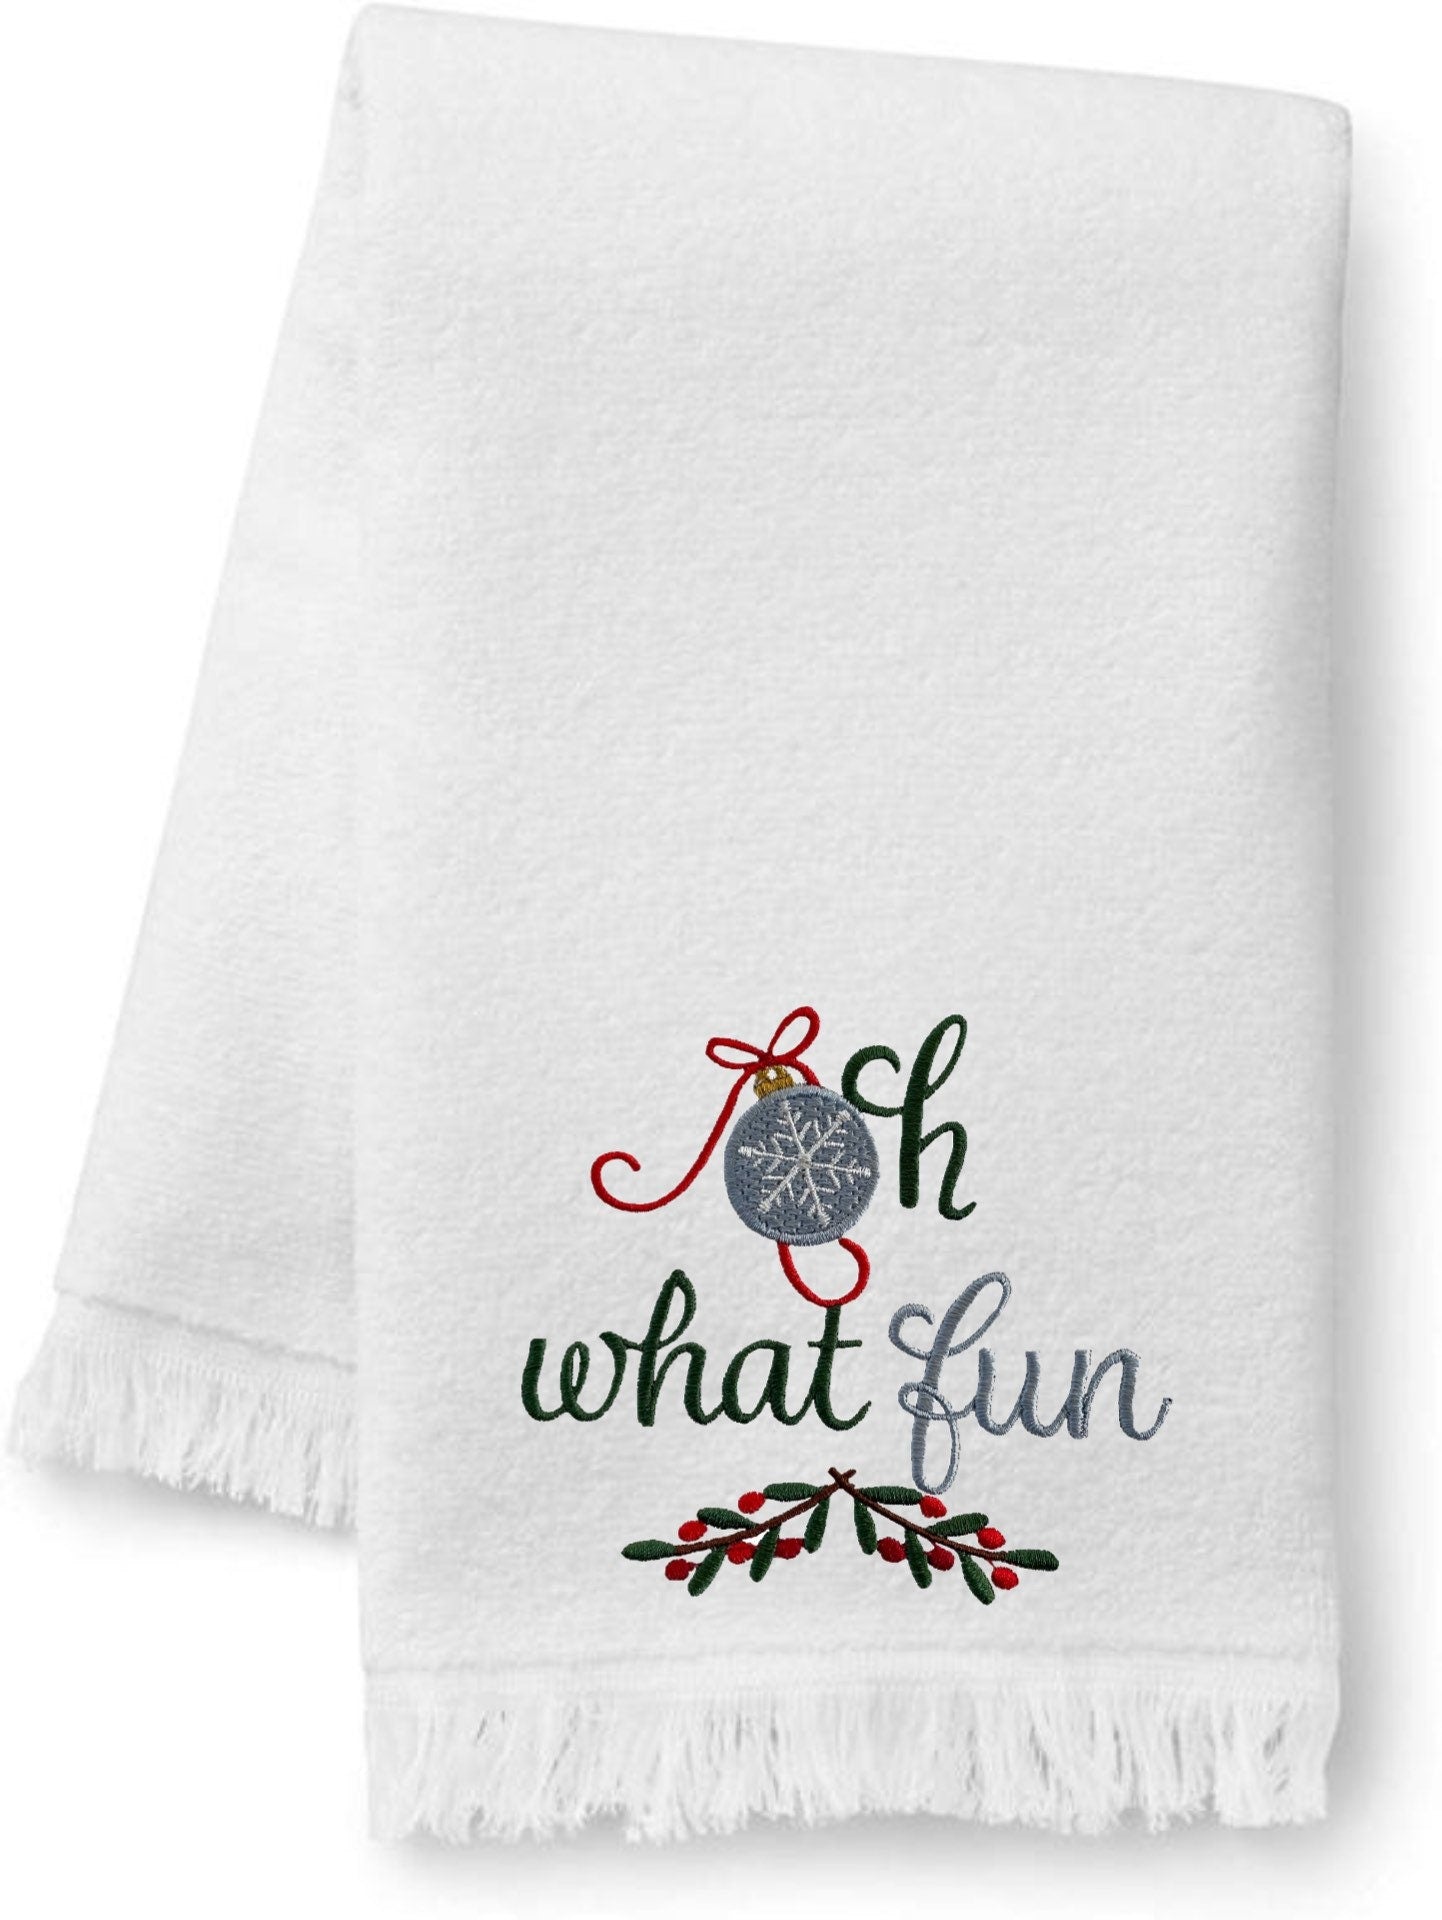 Embroidered Winter Christmas Towels “Oh What Fun” Bath Towels. 100% Plush Cotton Hand or Fingertip Towel